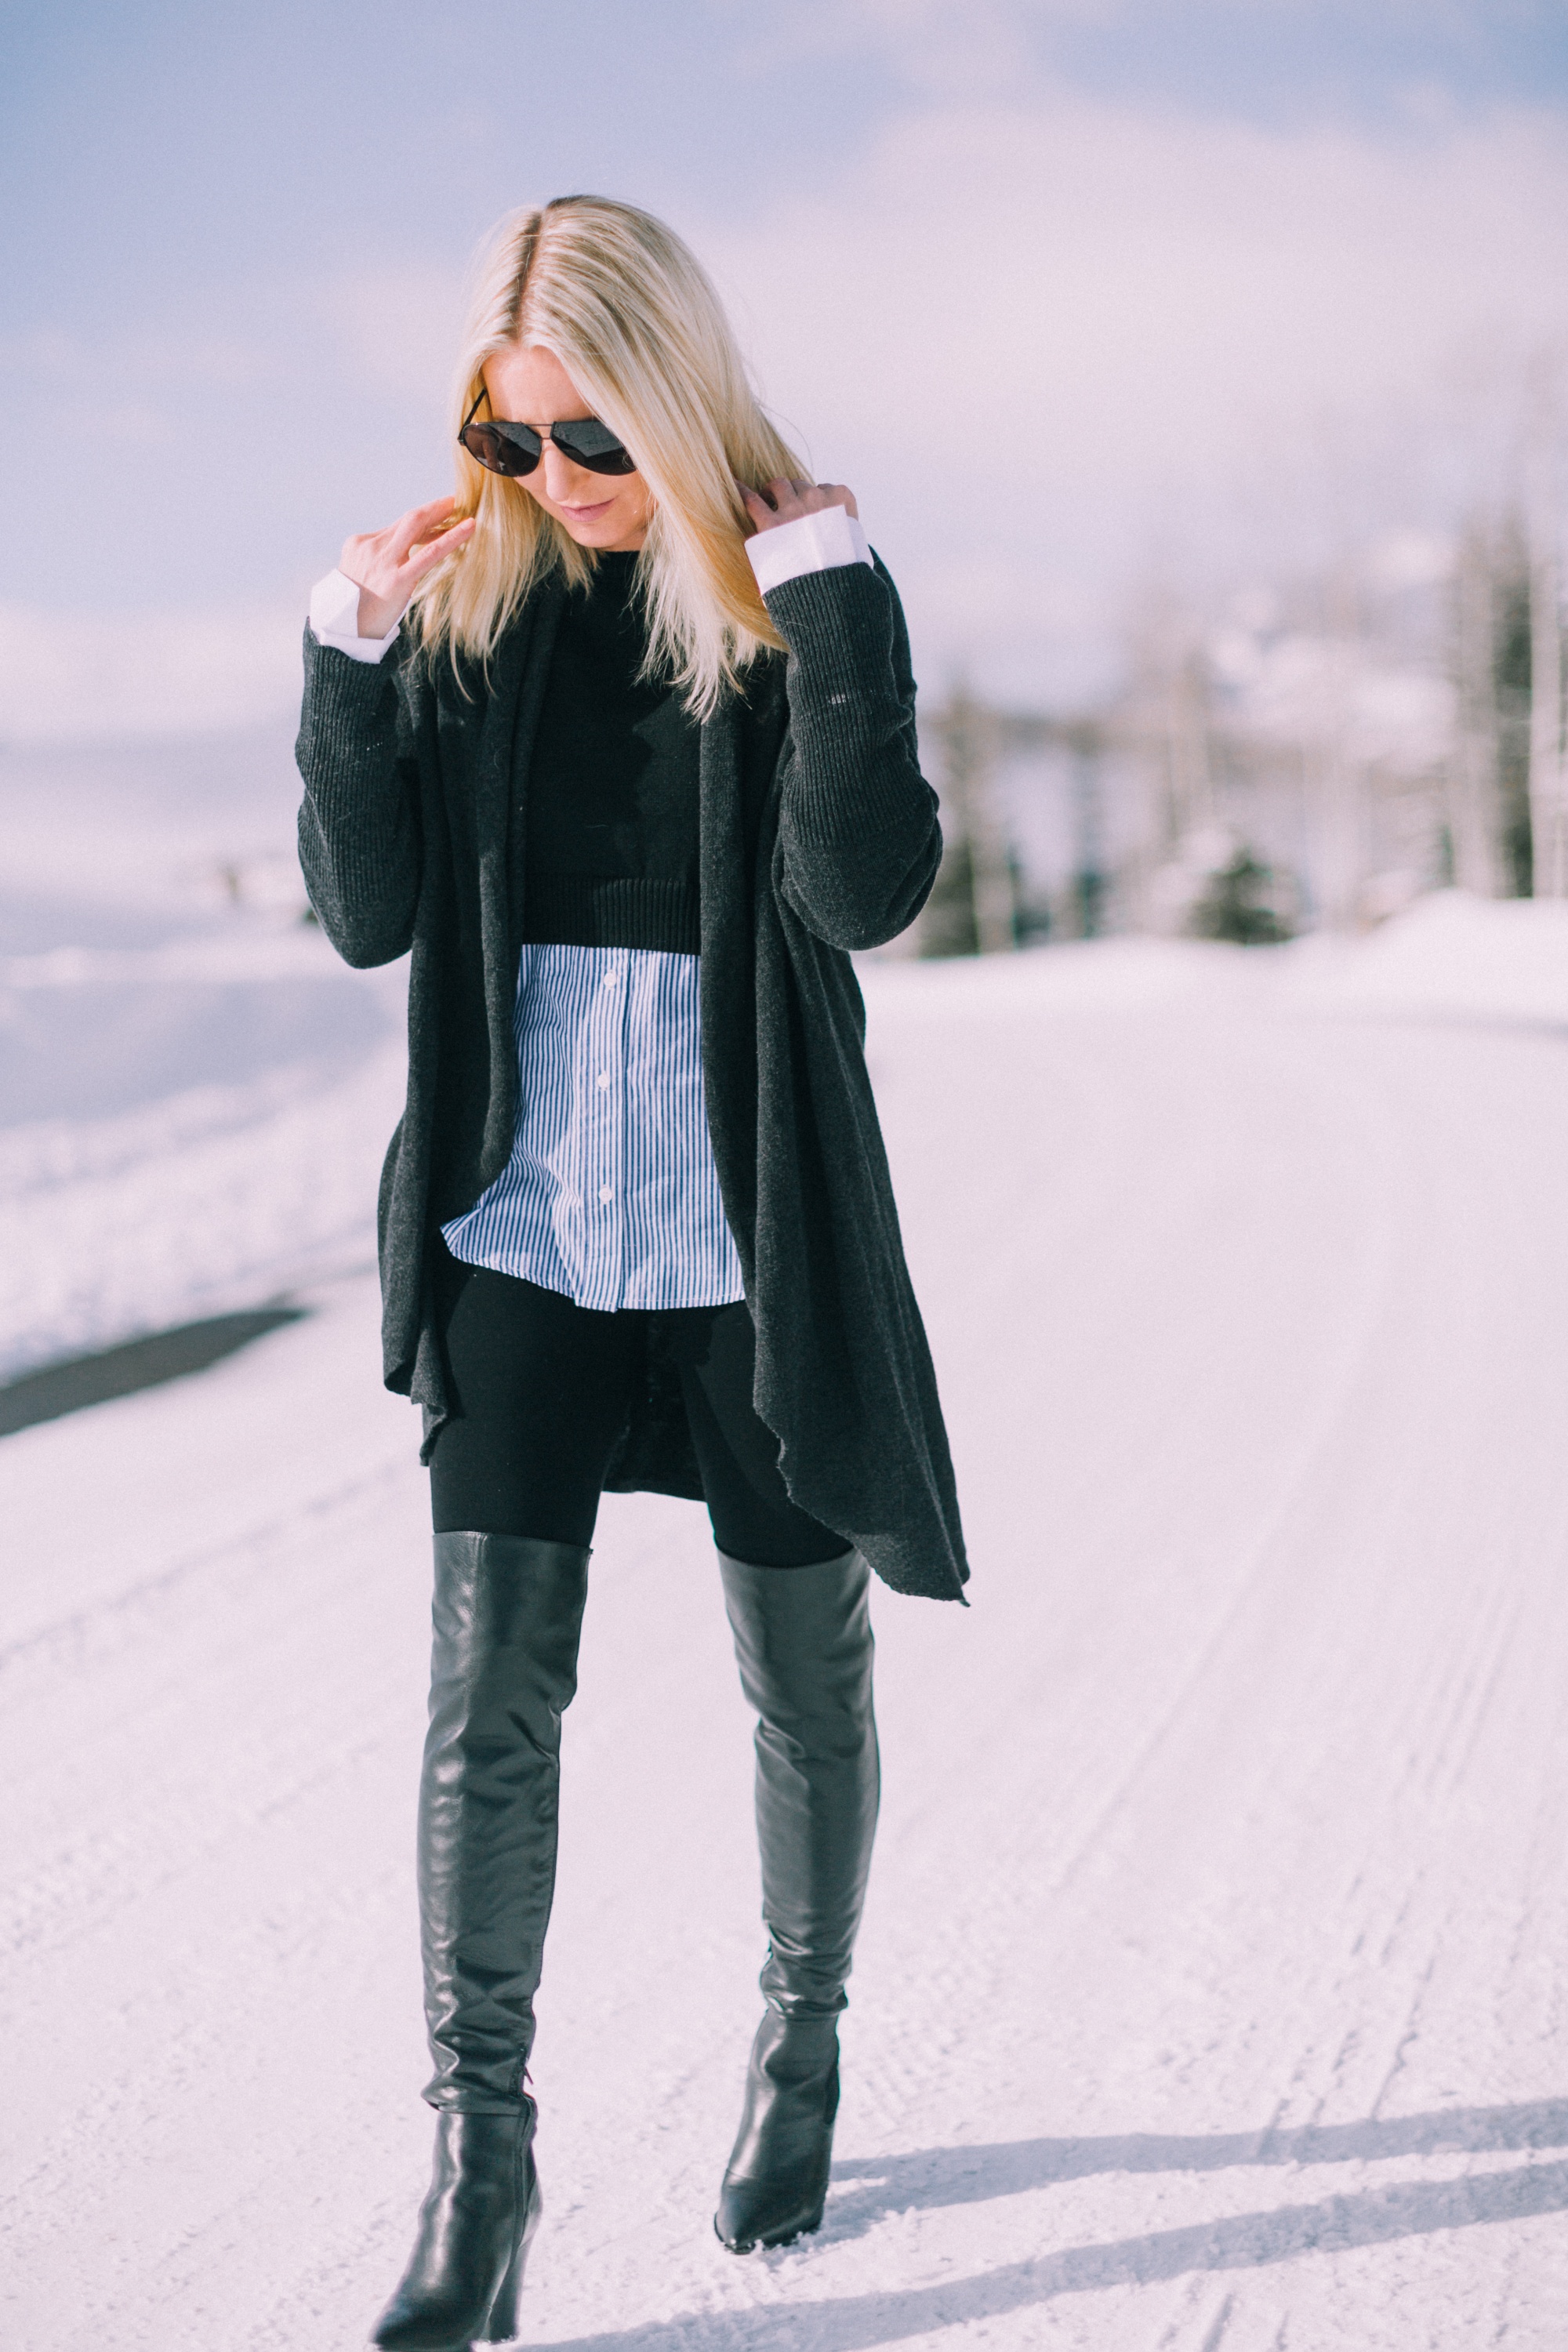 How to wear leggings over 40, featuring black Spanx leggings, Sam Edelman over the knee boots, Barefoot Dreams cardigan, and two-in-one layered sweater worn by fashion blogger Erin Busbee of busbeestyle.com in Telluride Colorado